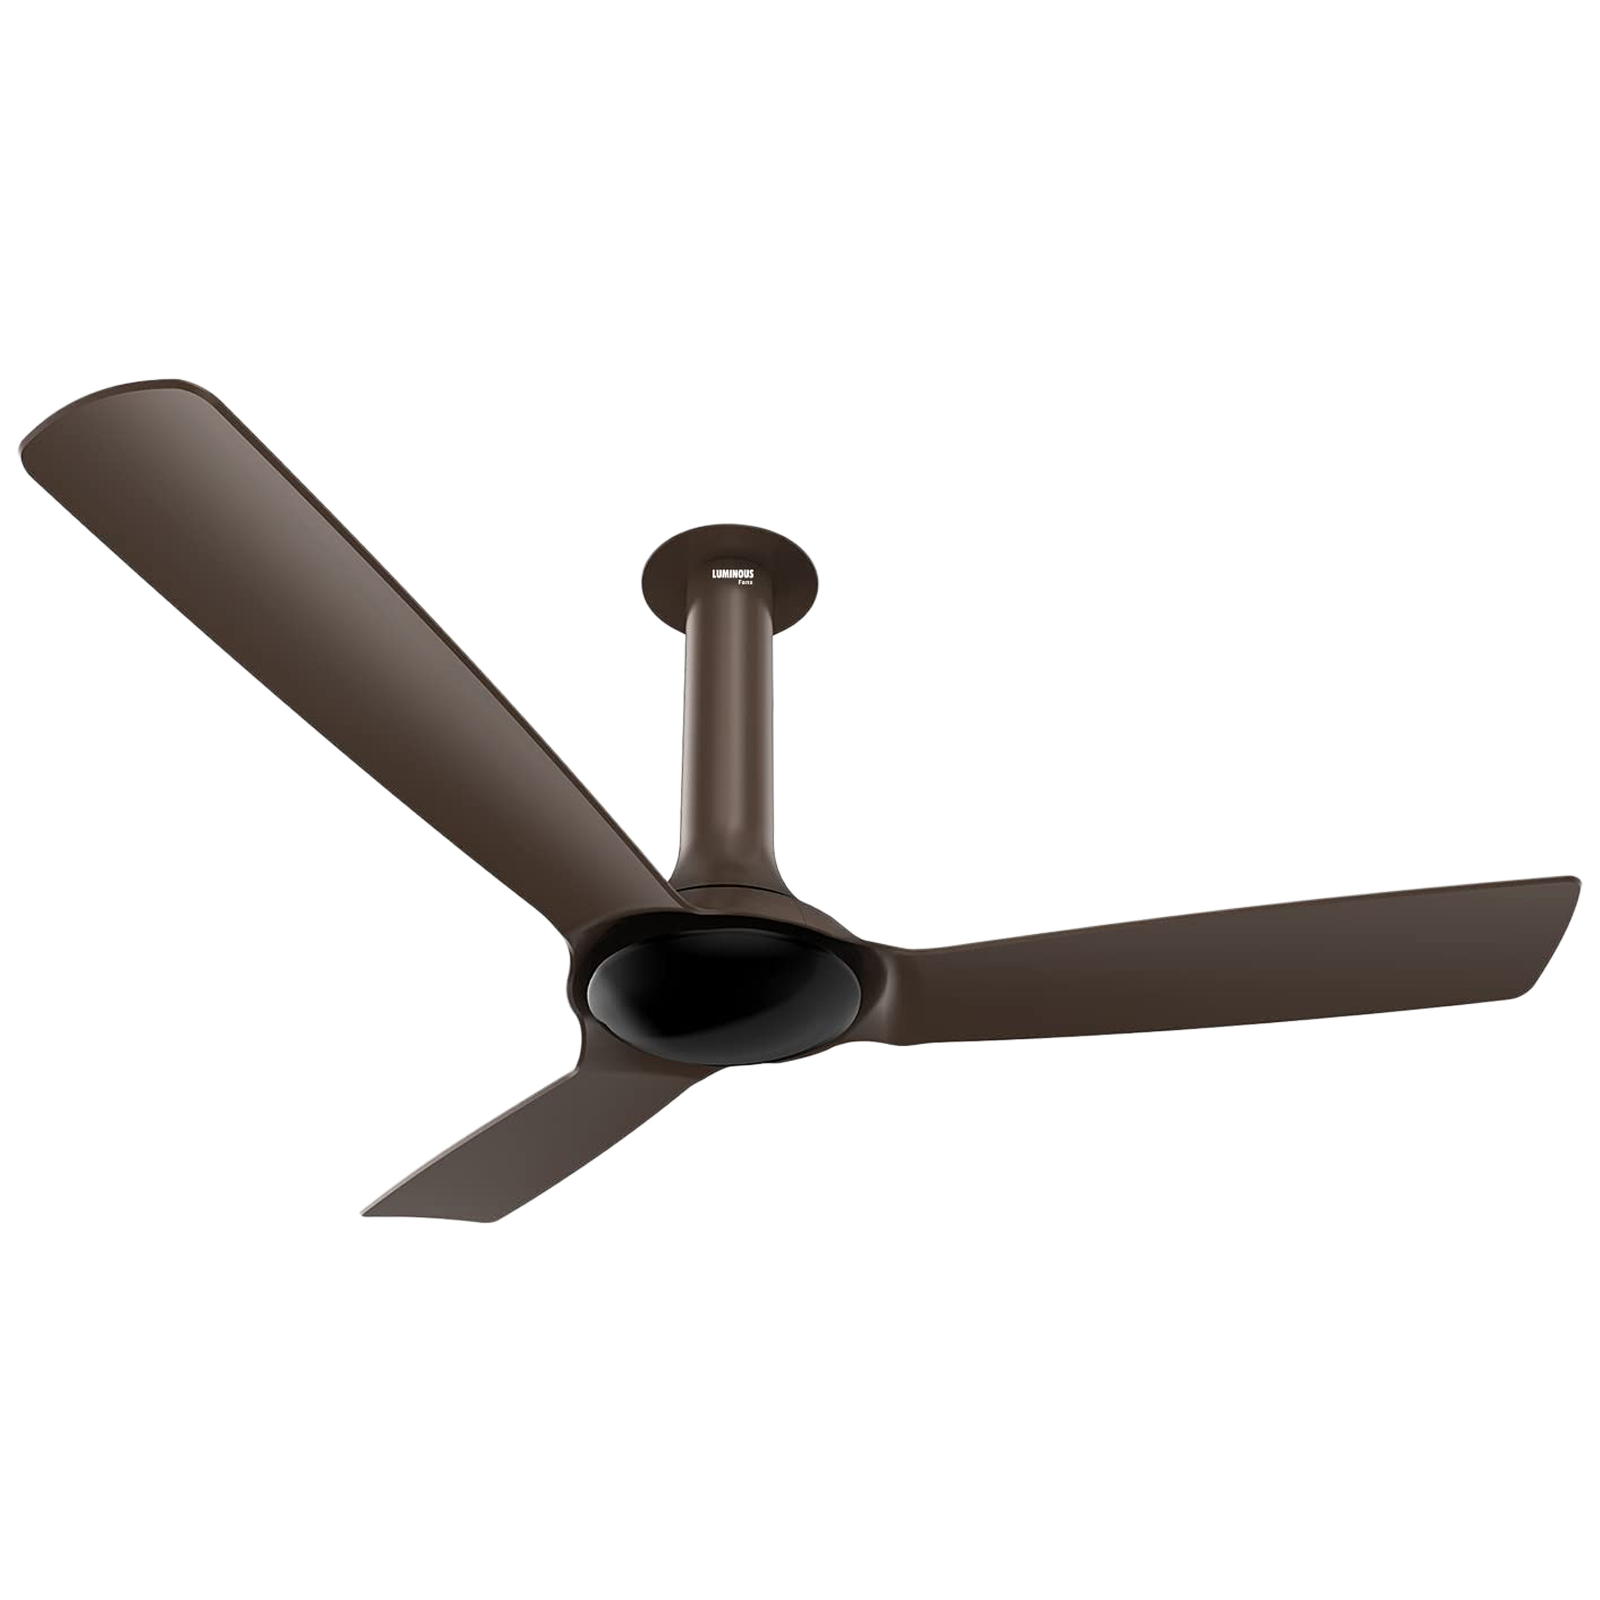 Luminous New York Chelsea 120cm Sweep 3 Blade Ceiling Fan (5 Speed Settings, F05NYCHLCRBR, Caramel Brown)_1